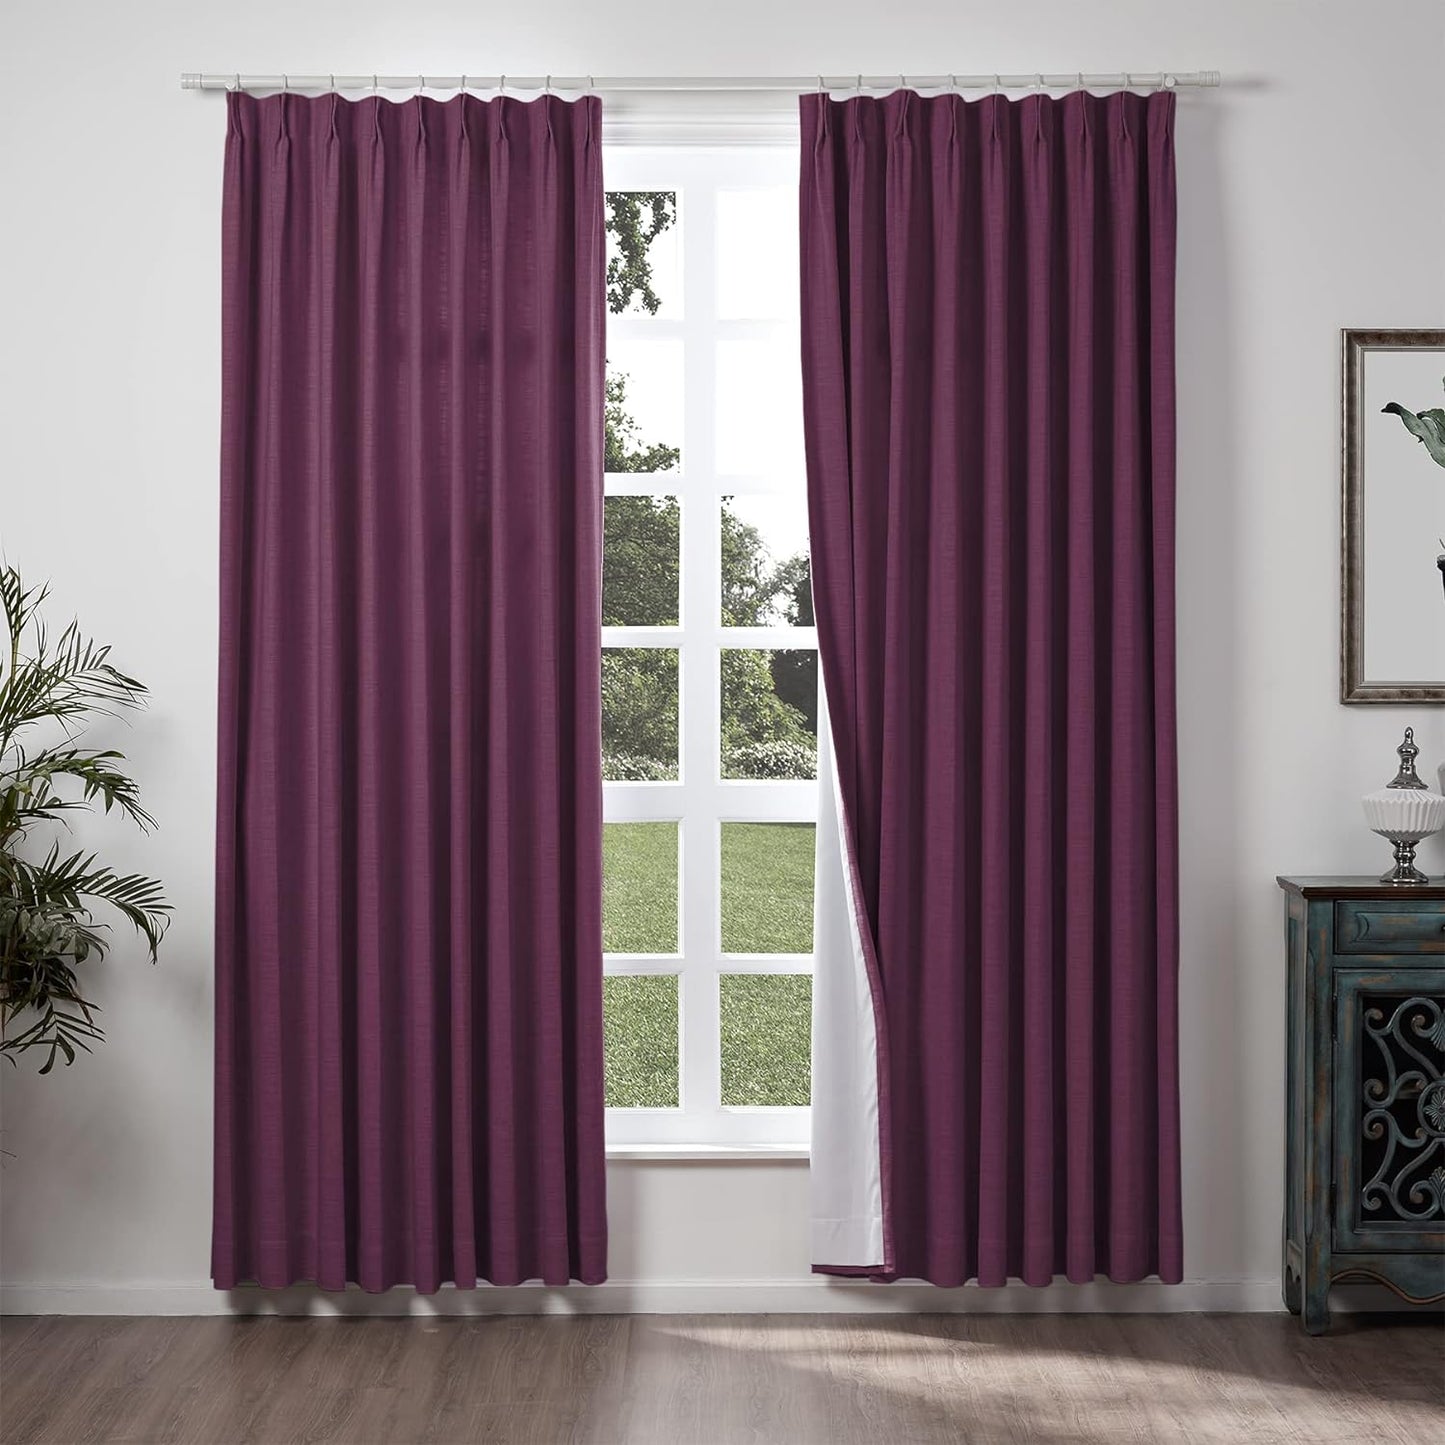 Chadmade 50" W X 84" L Polyester Linen Drape with Blackout Lining Pinch Pleat Curtain for Sliding Door Patio Door Living Room Bedroom, (1 Panel) Beige White Liz Collection  ChadMade Plum (21) 100Wx96L 